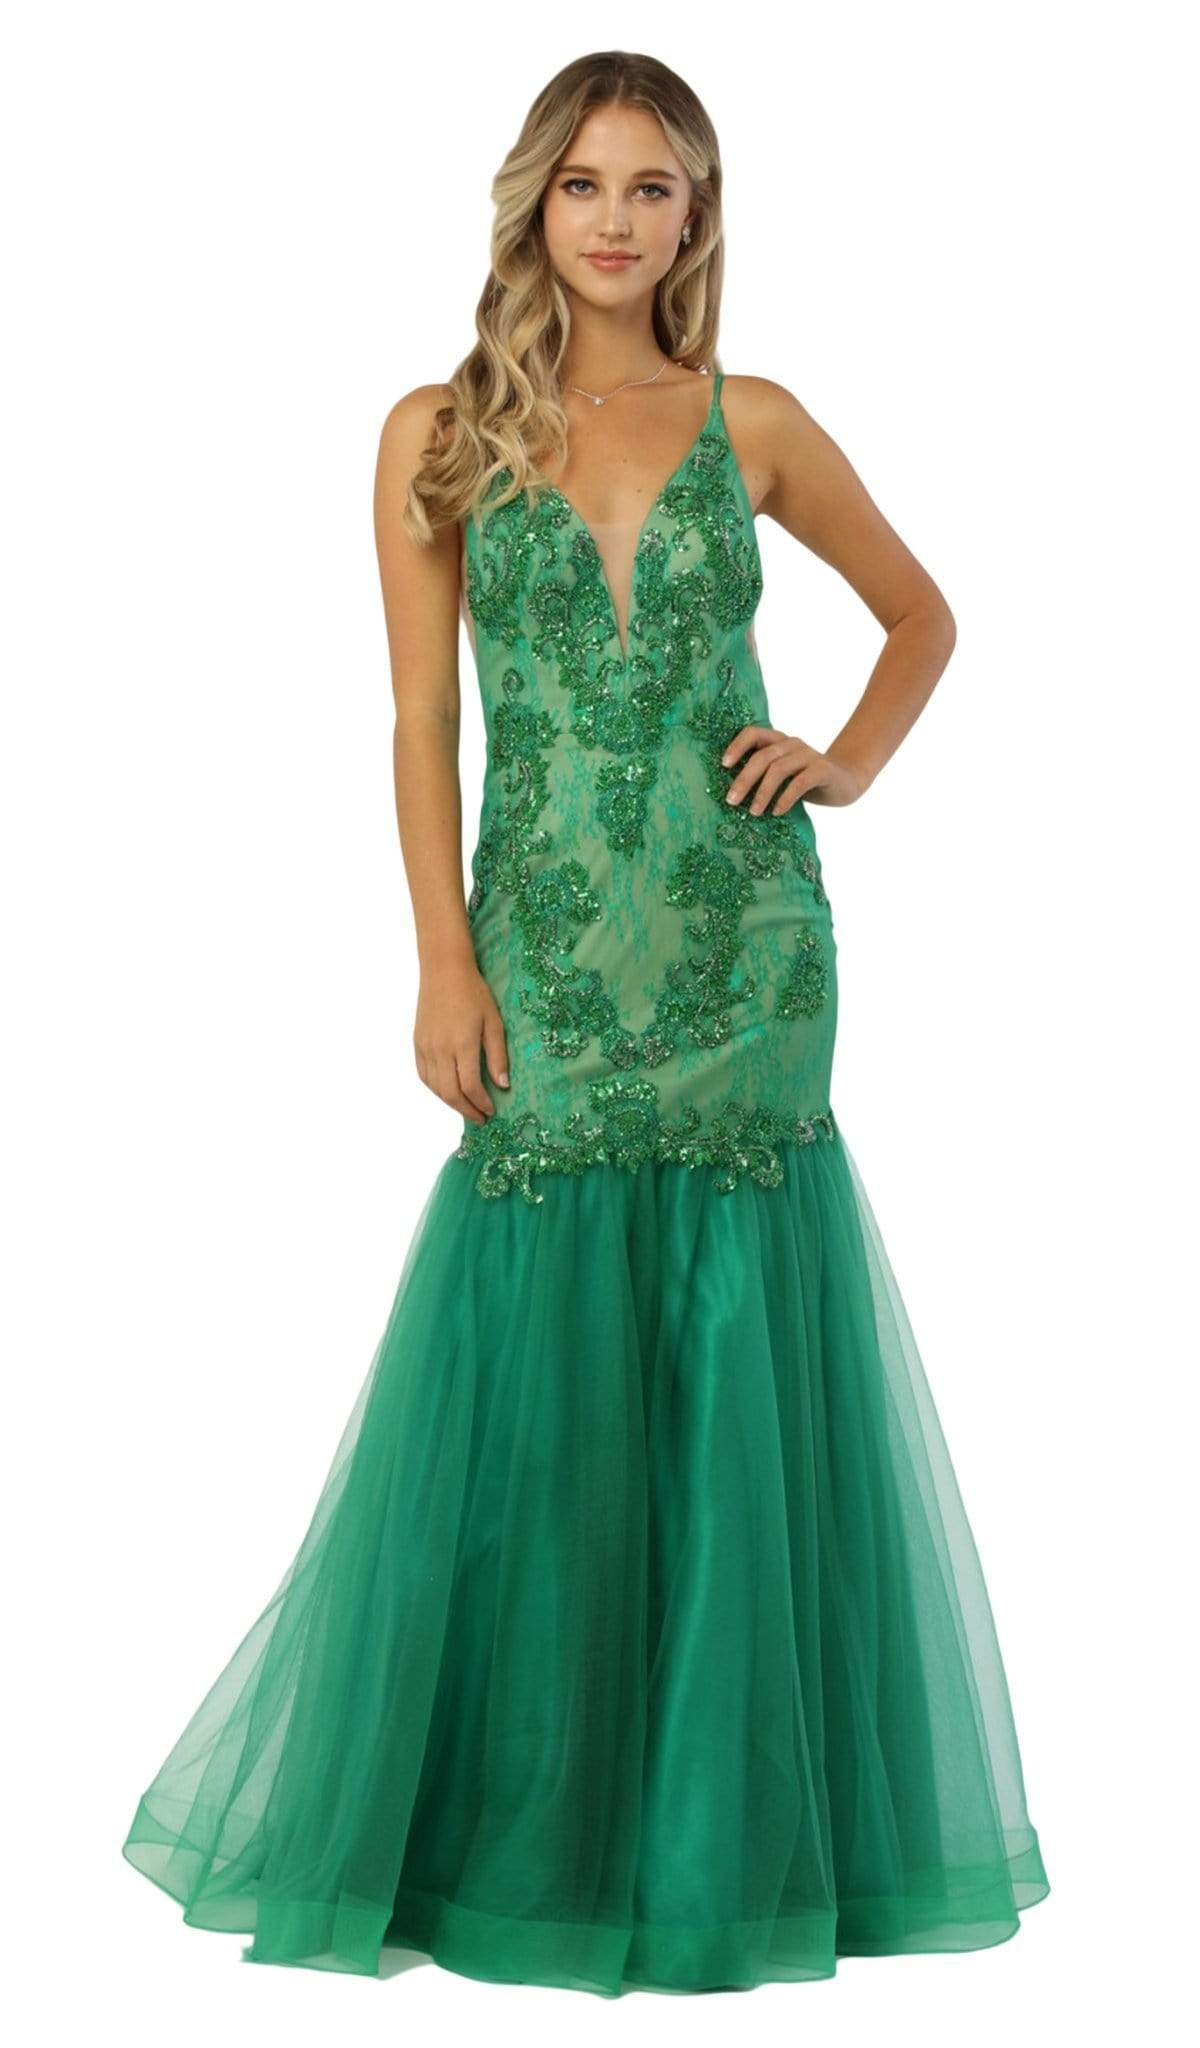 Image of Nox Anabel - E185 Sleeveless V Neck Beaded Lace Tulle Mermaid Gown